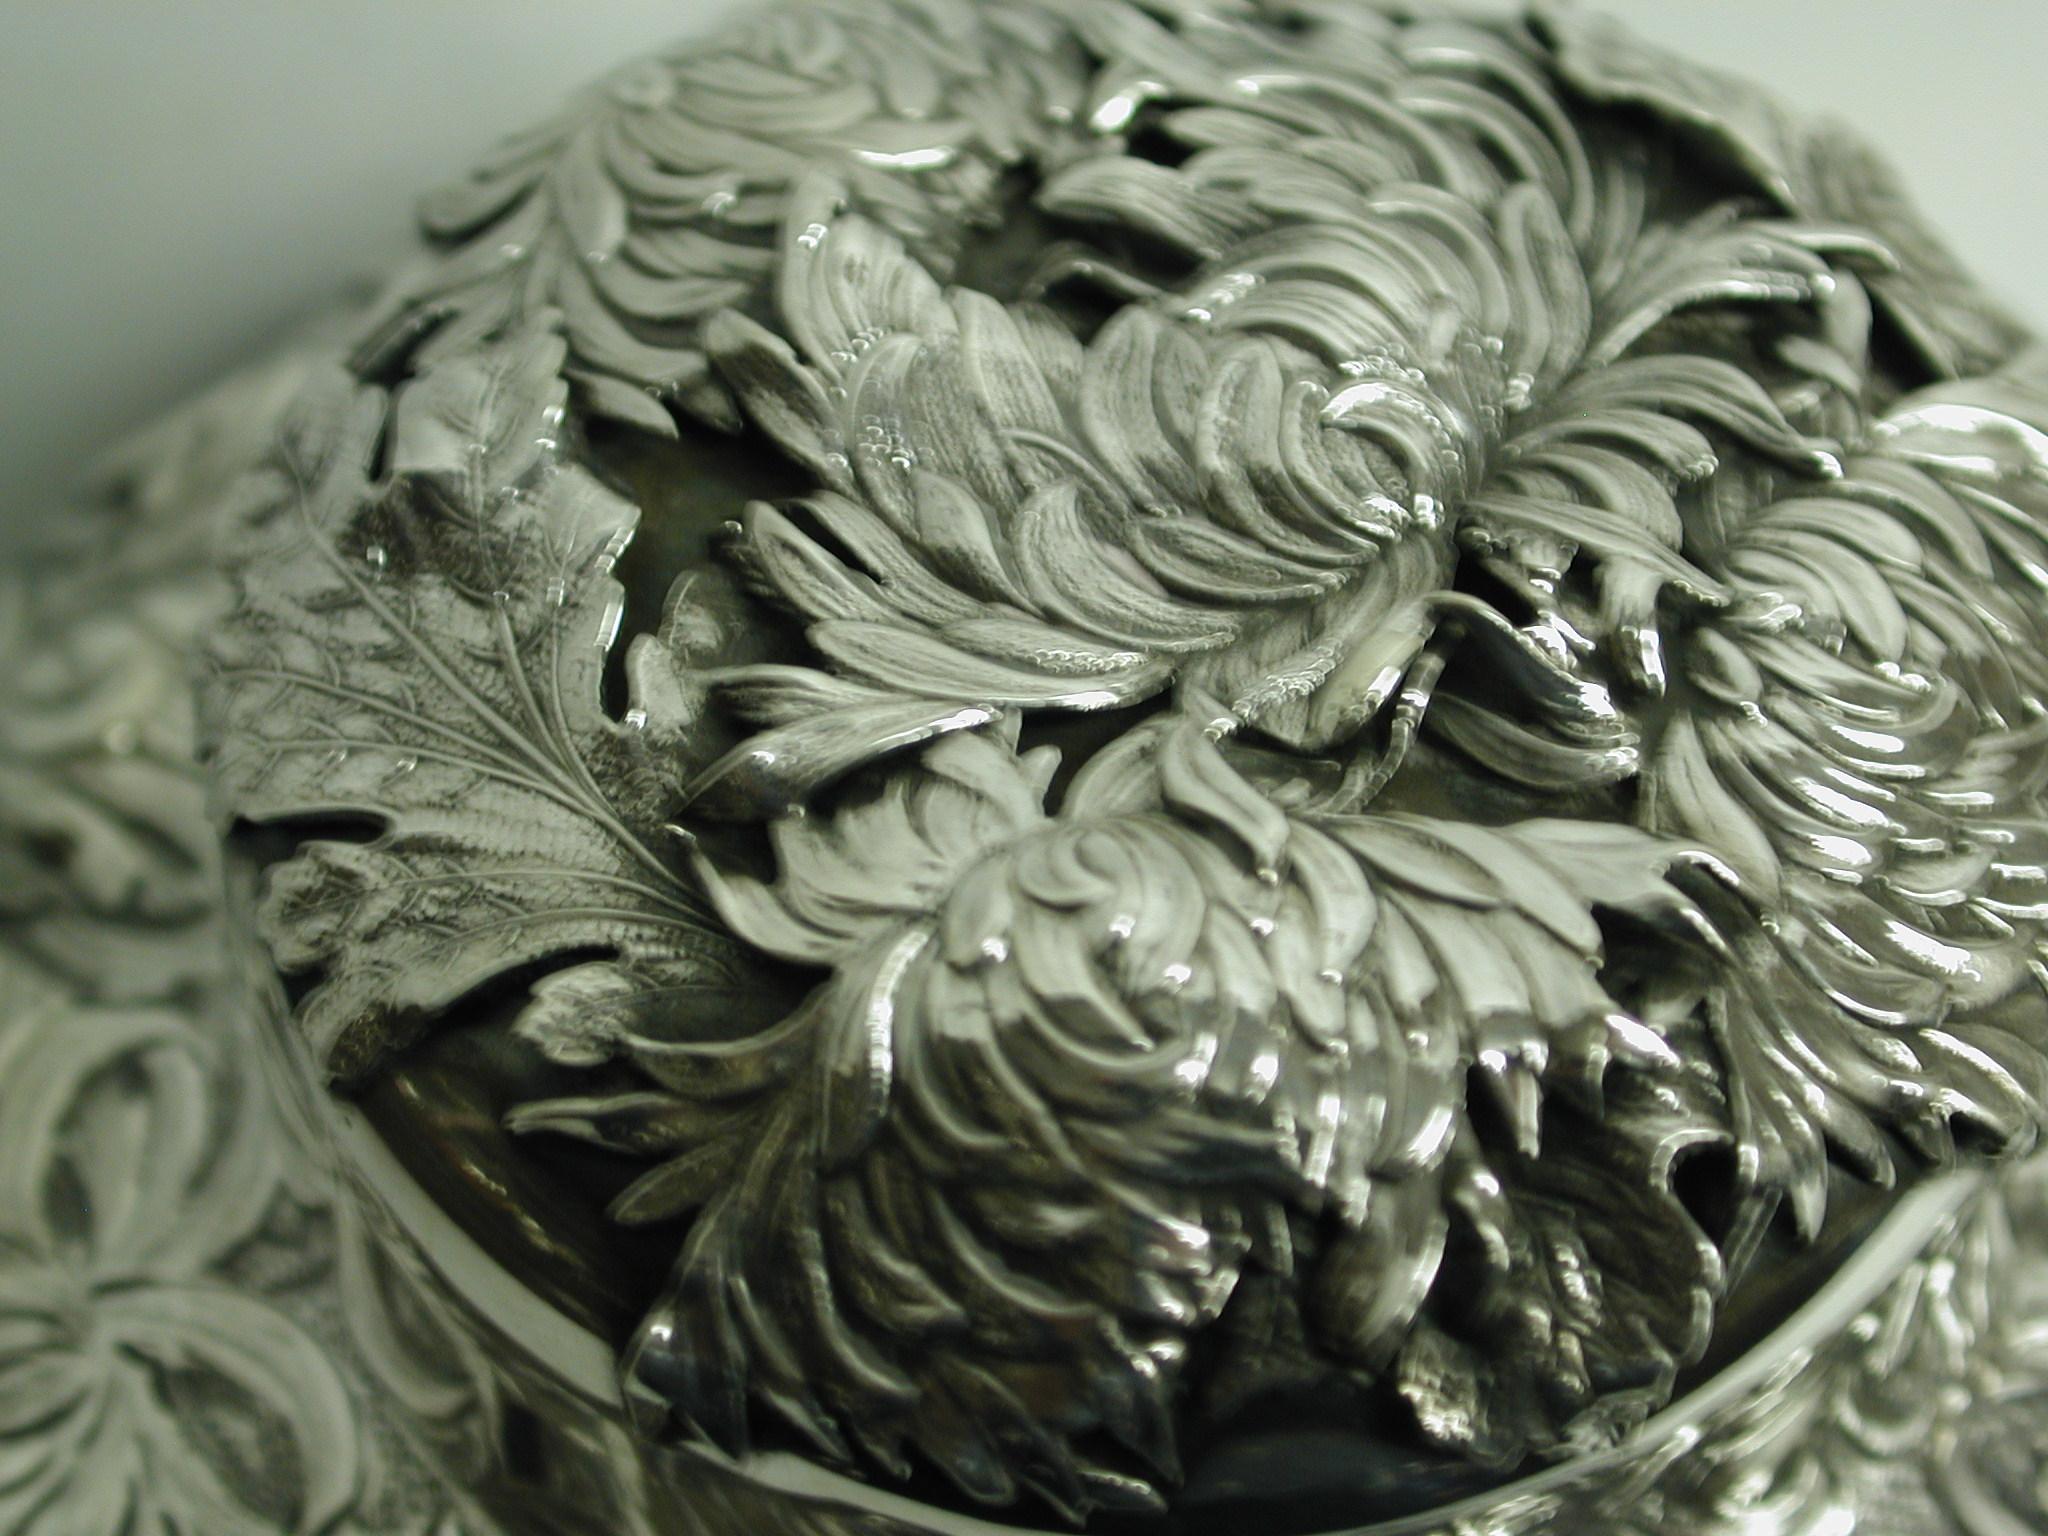 Late 19th Century  Aesthetic Japonesque Sterling Silver Chrysanthemum Tea Caddy, C.1890, New York